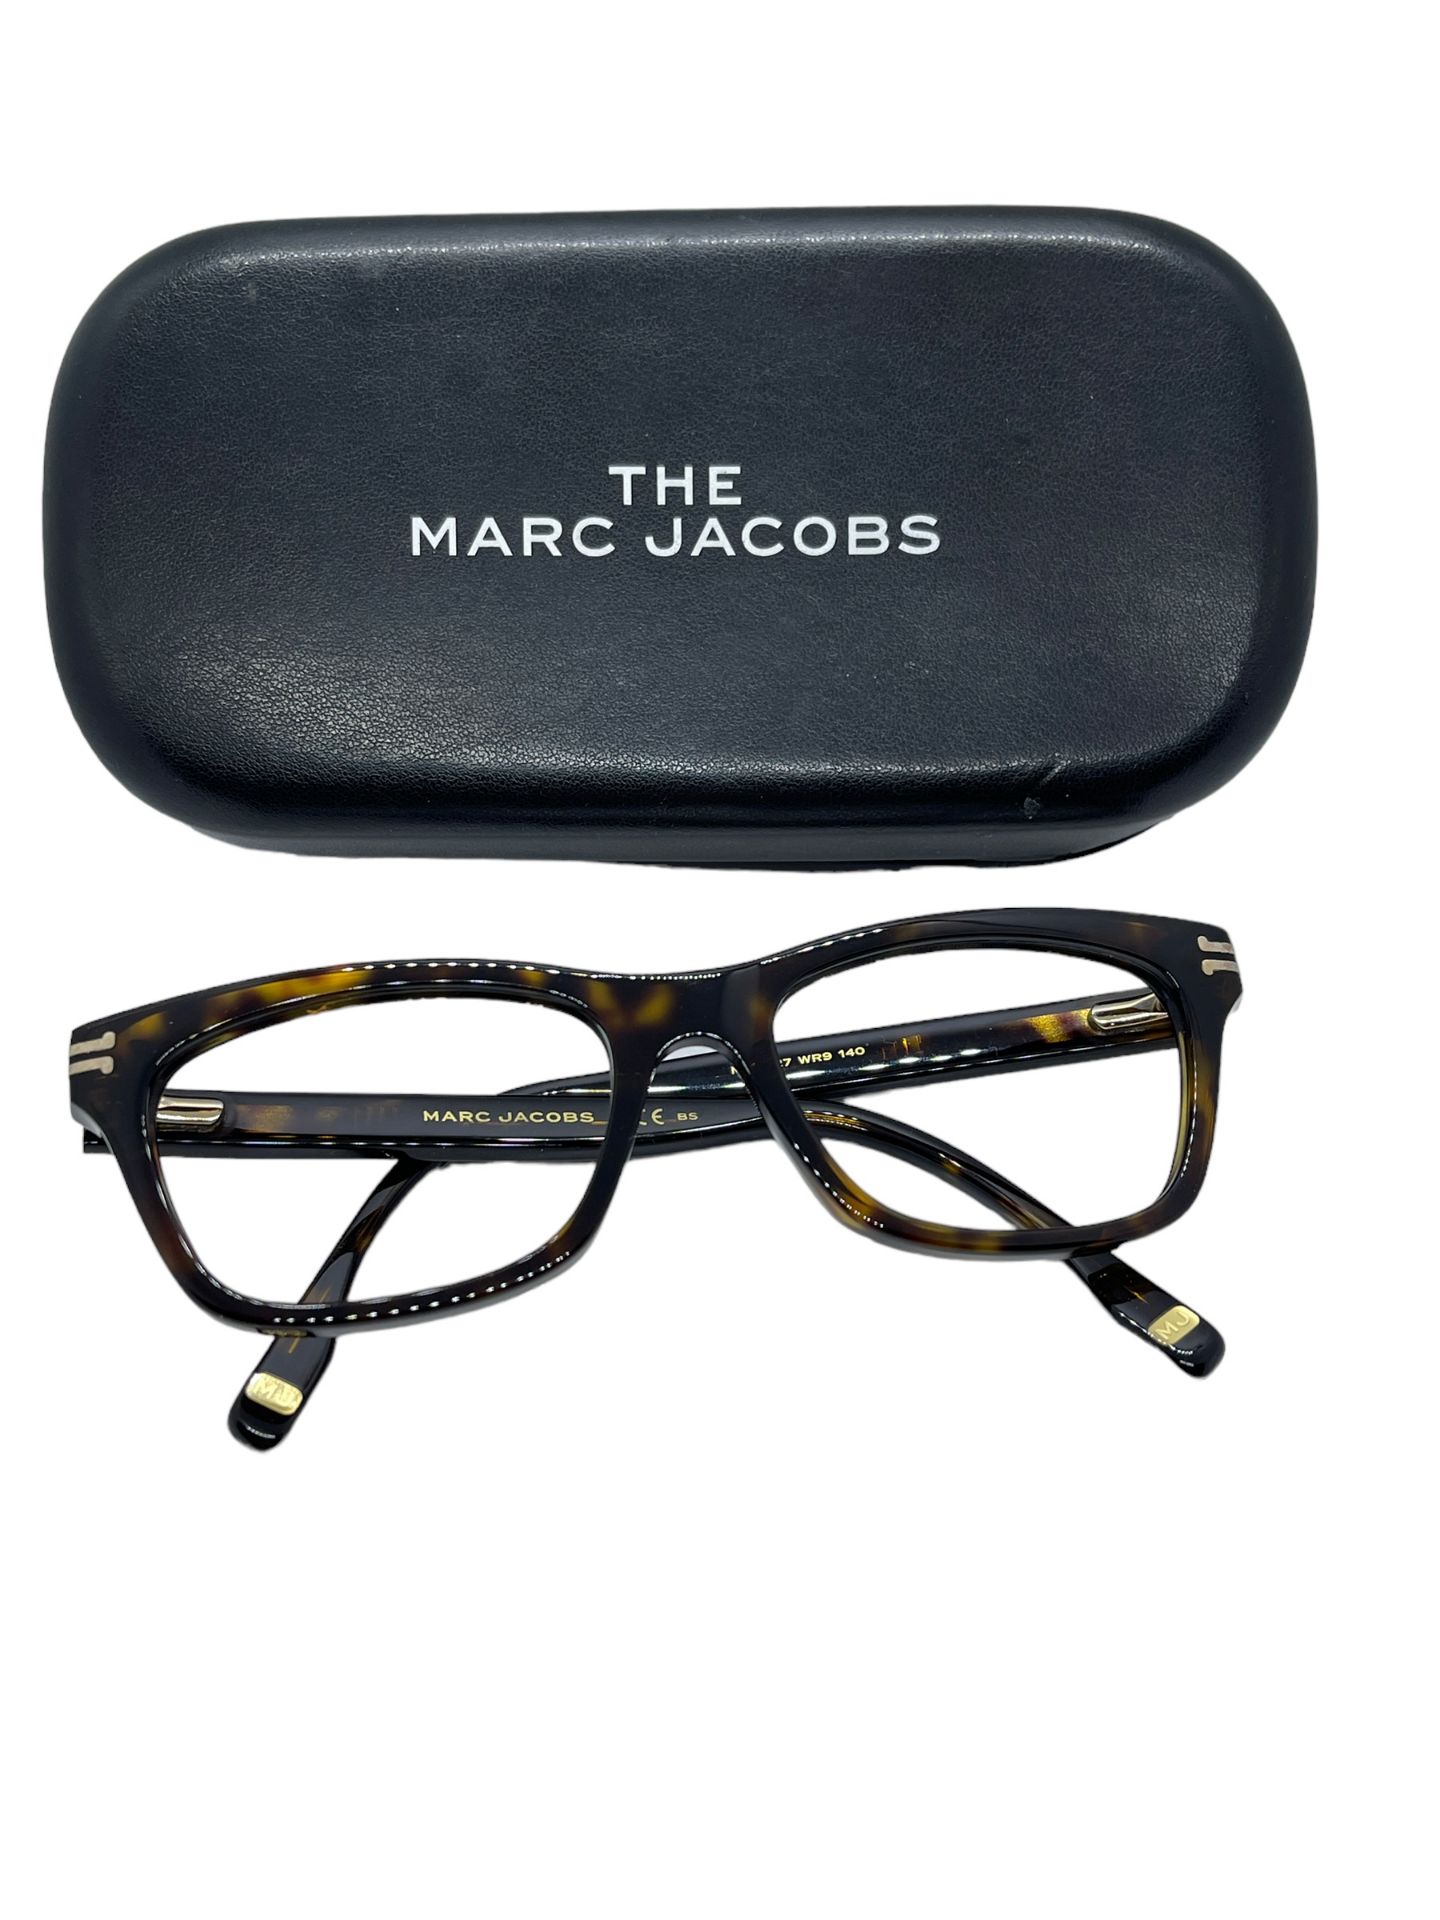 Marc Jacob's new spectacles mens. - Image 5 of 9